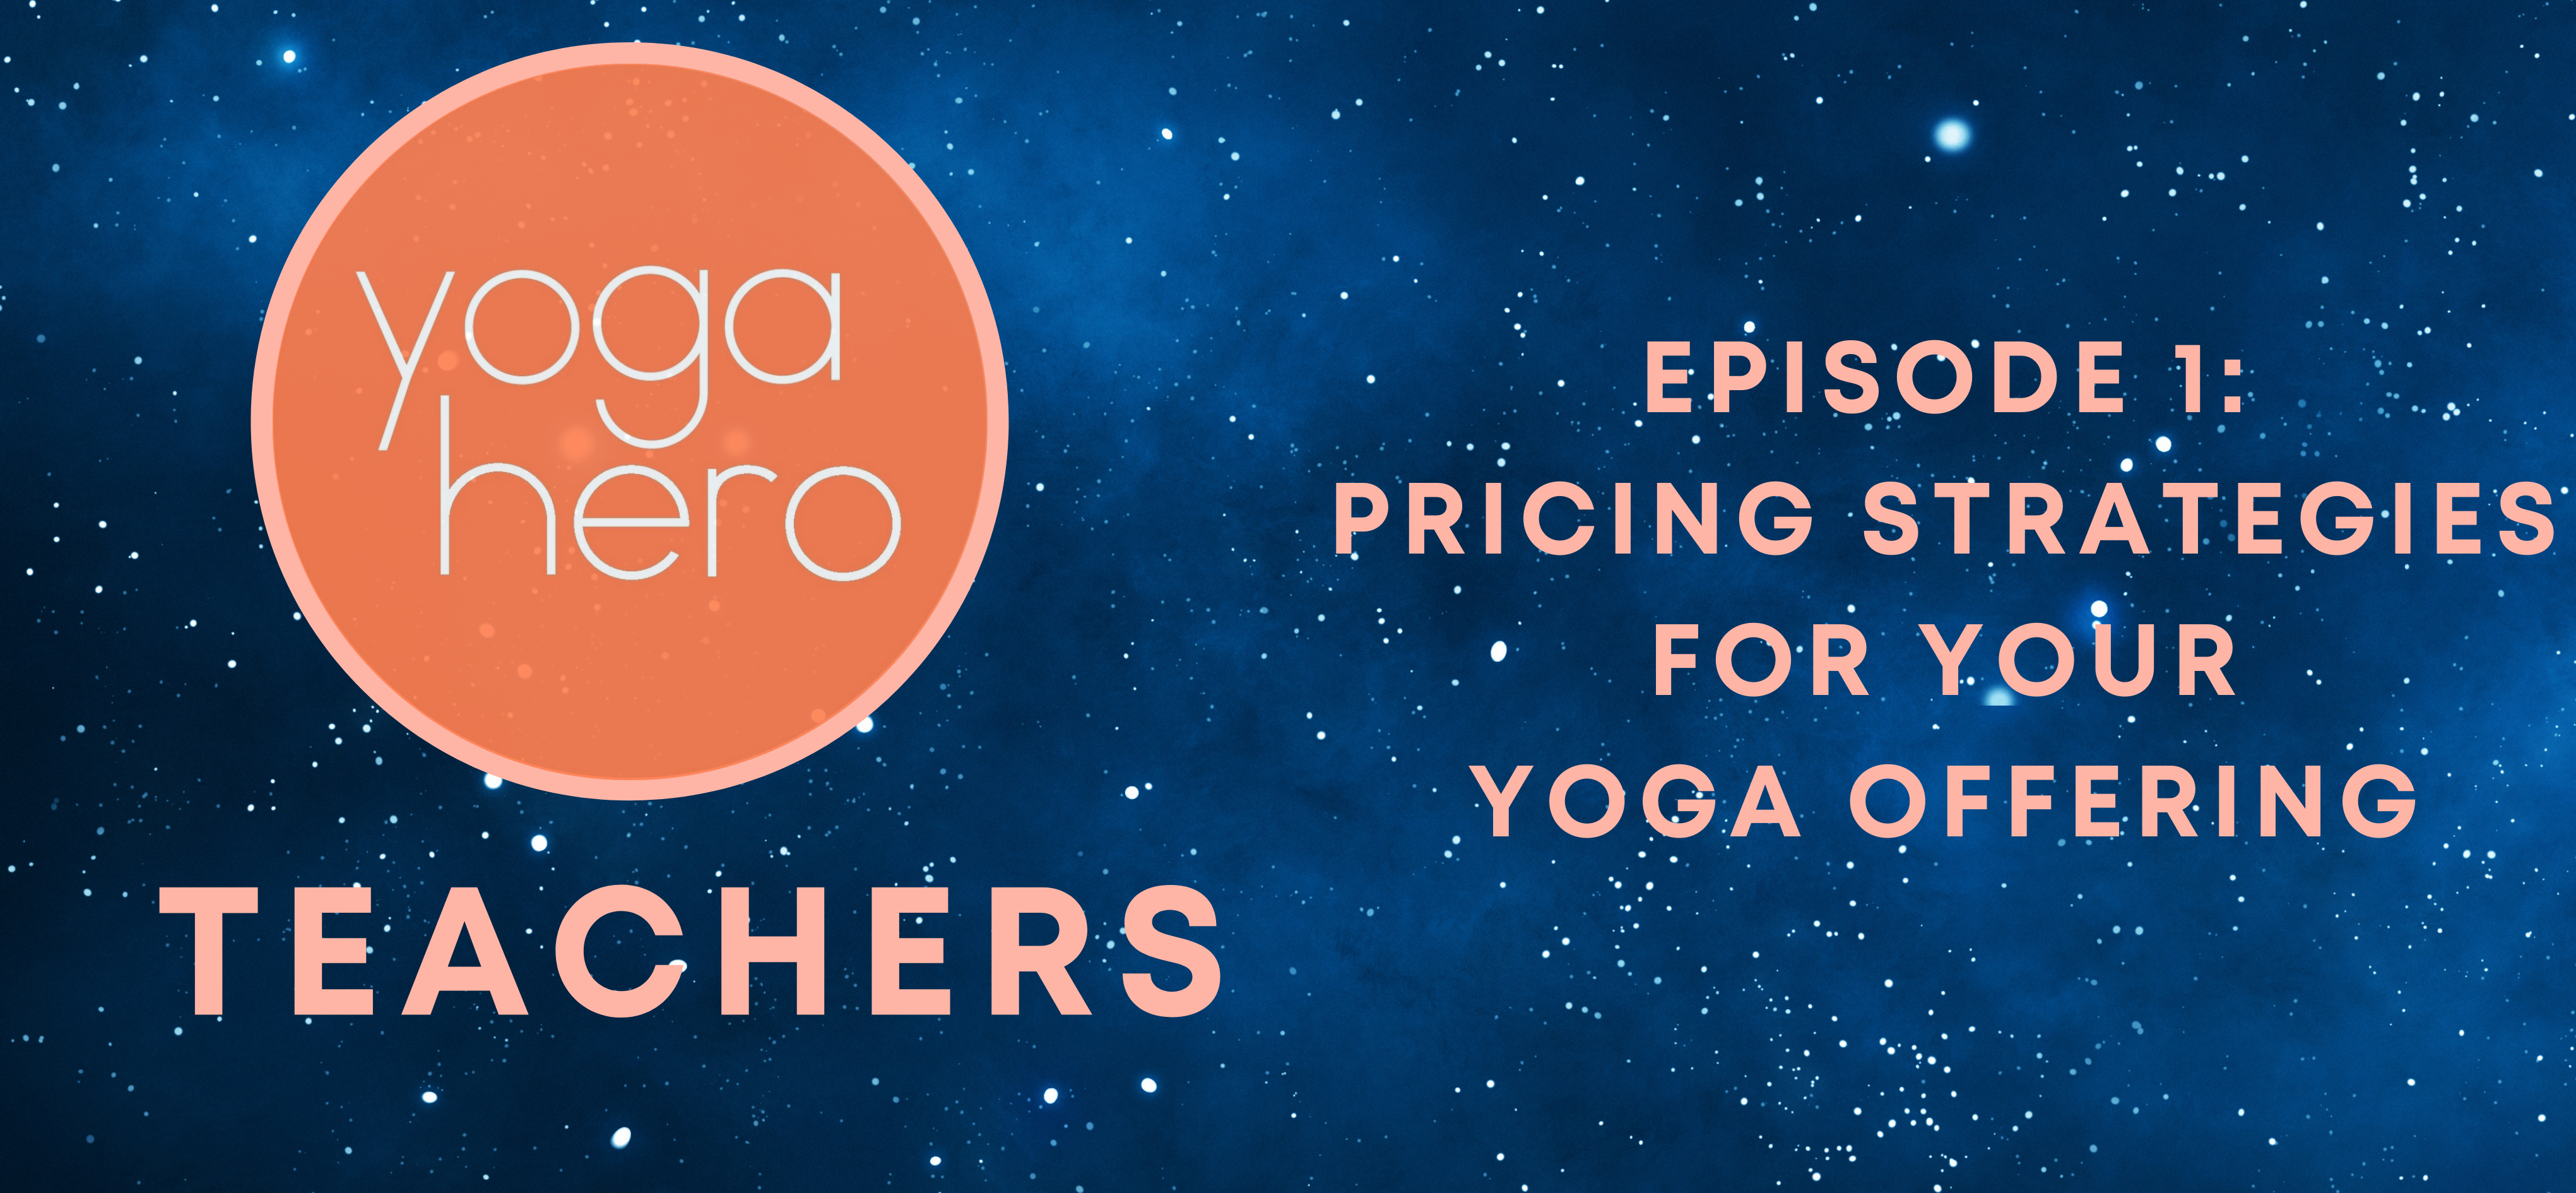 Pricing strategies for your yoga offering